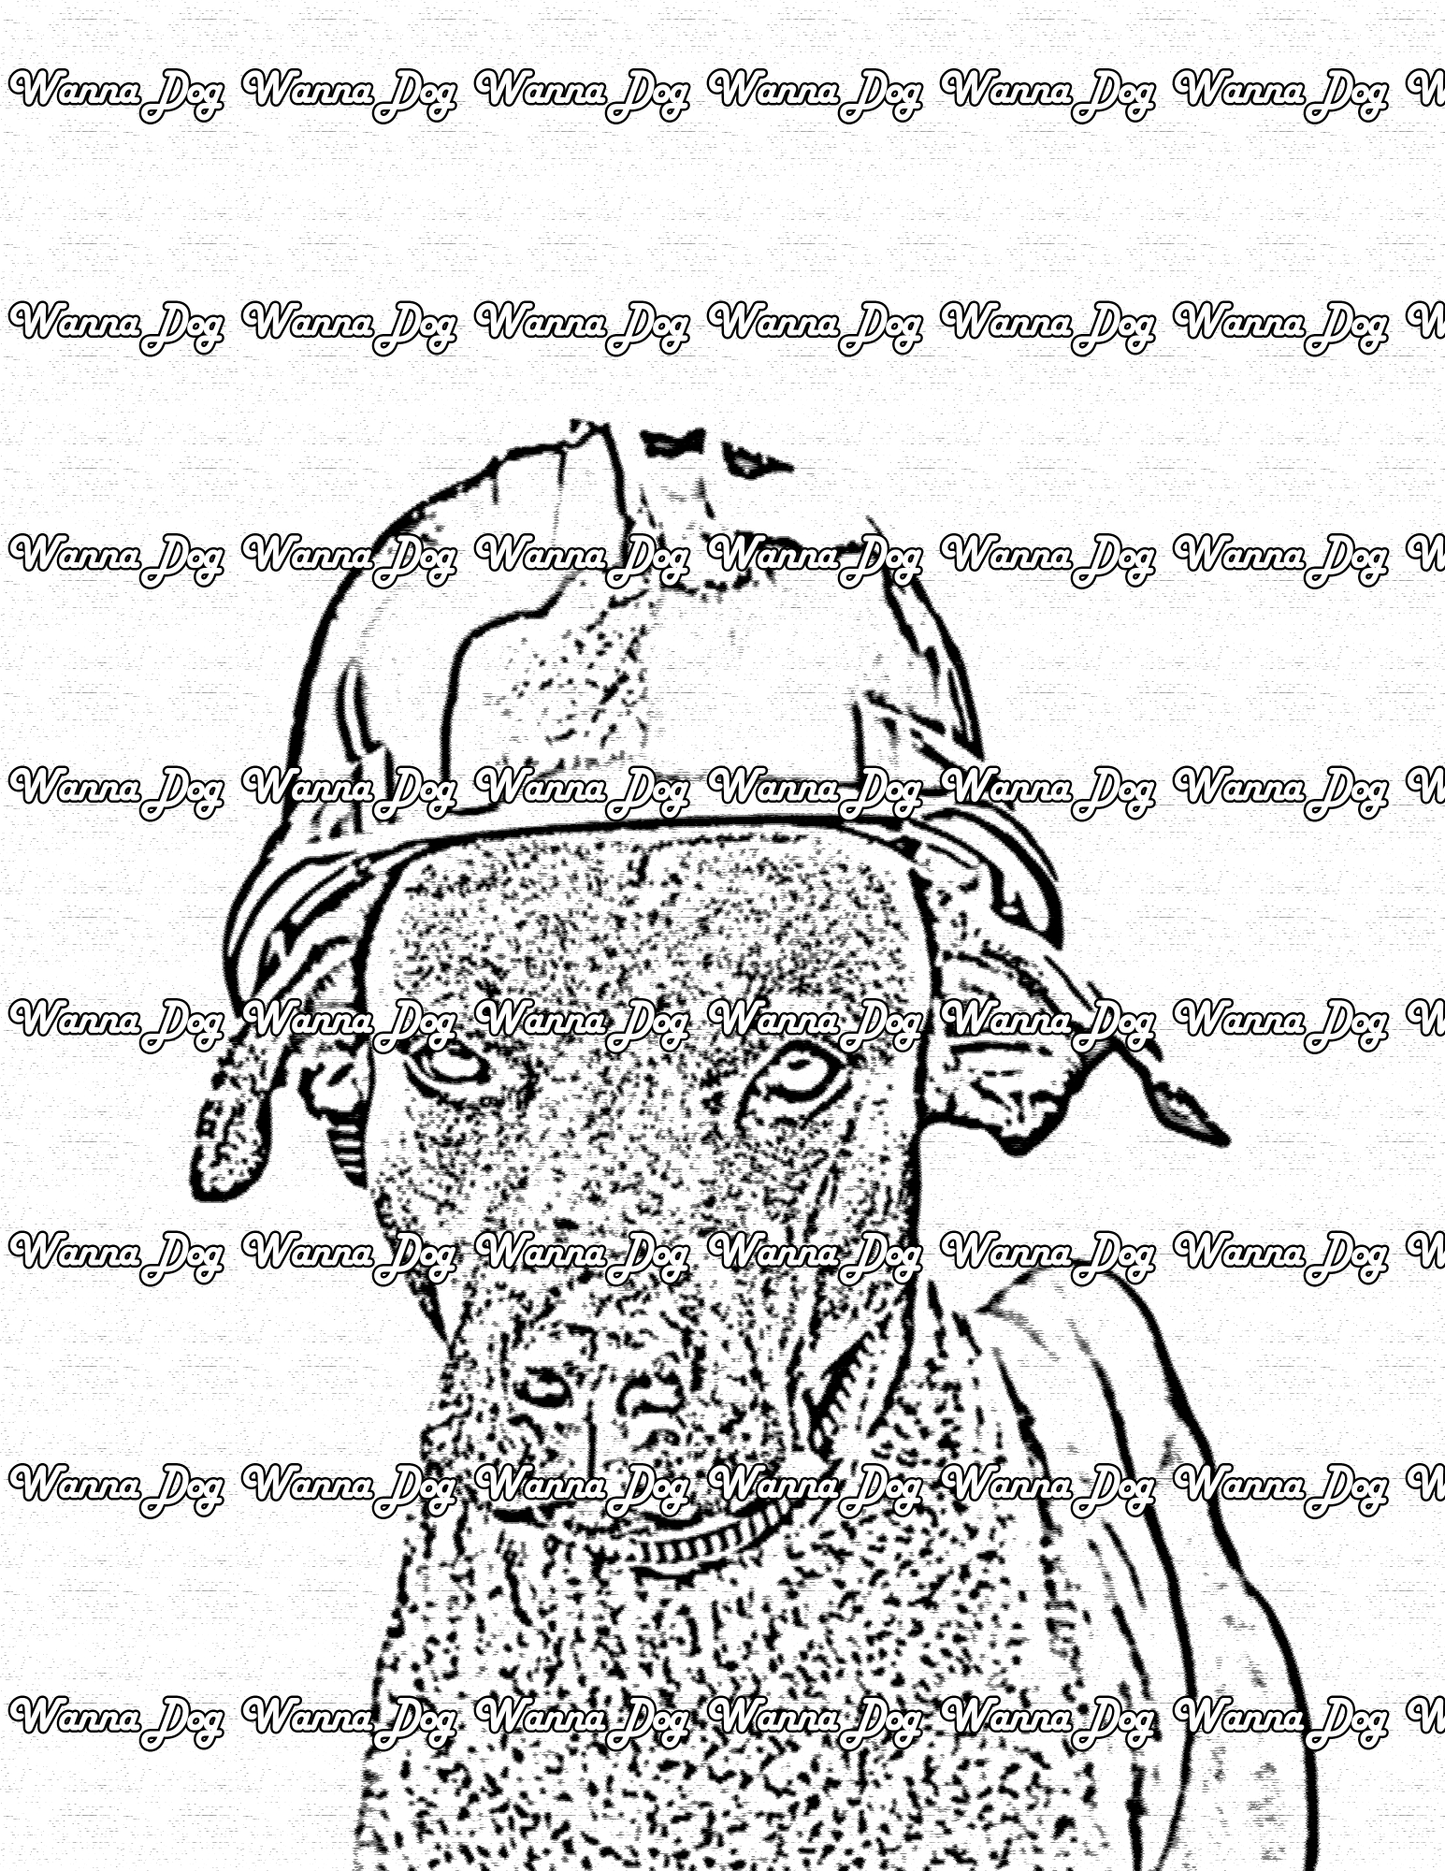 Dachshund Coloring Page of a Dachshund with a construction hat